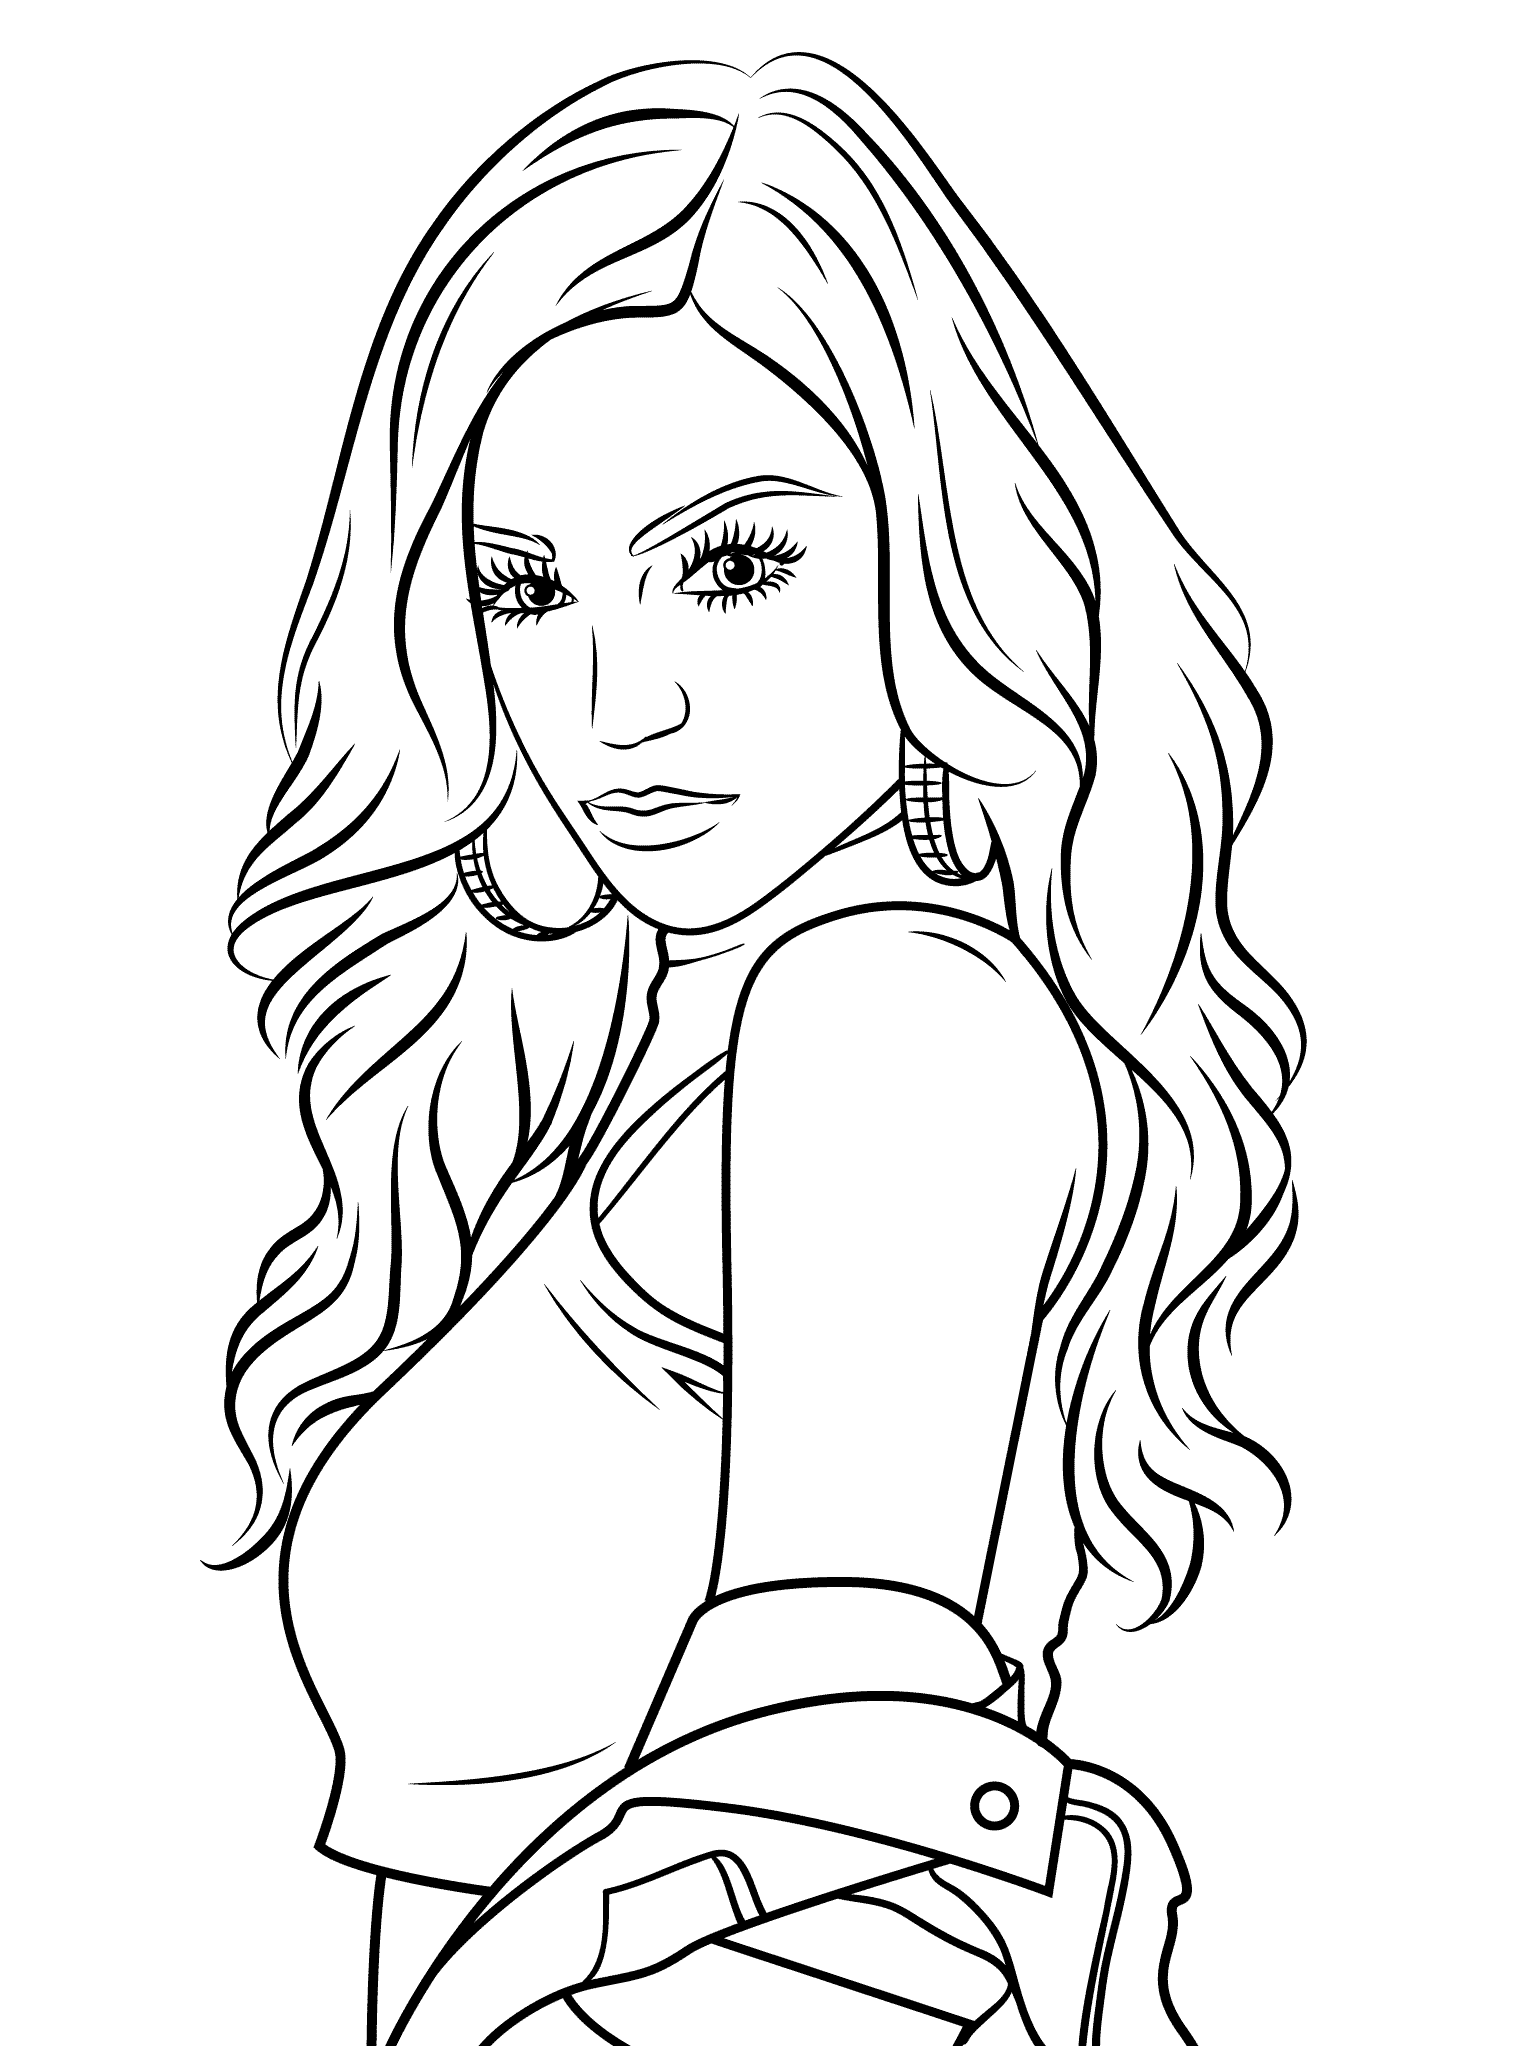 Cher Lloyd Celebrity Coloring Page